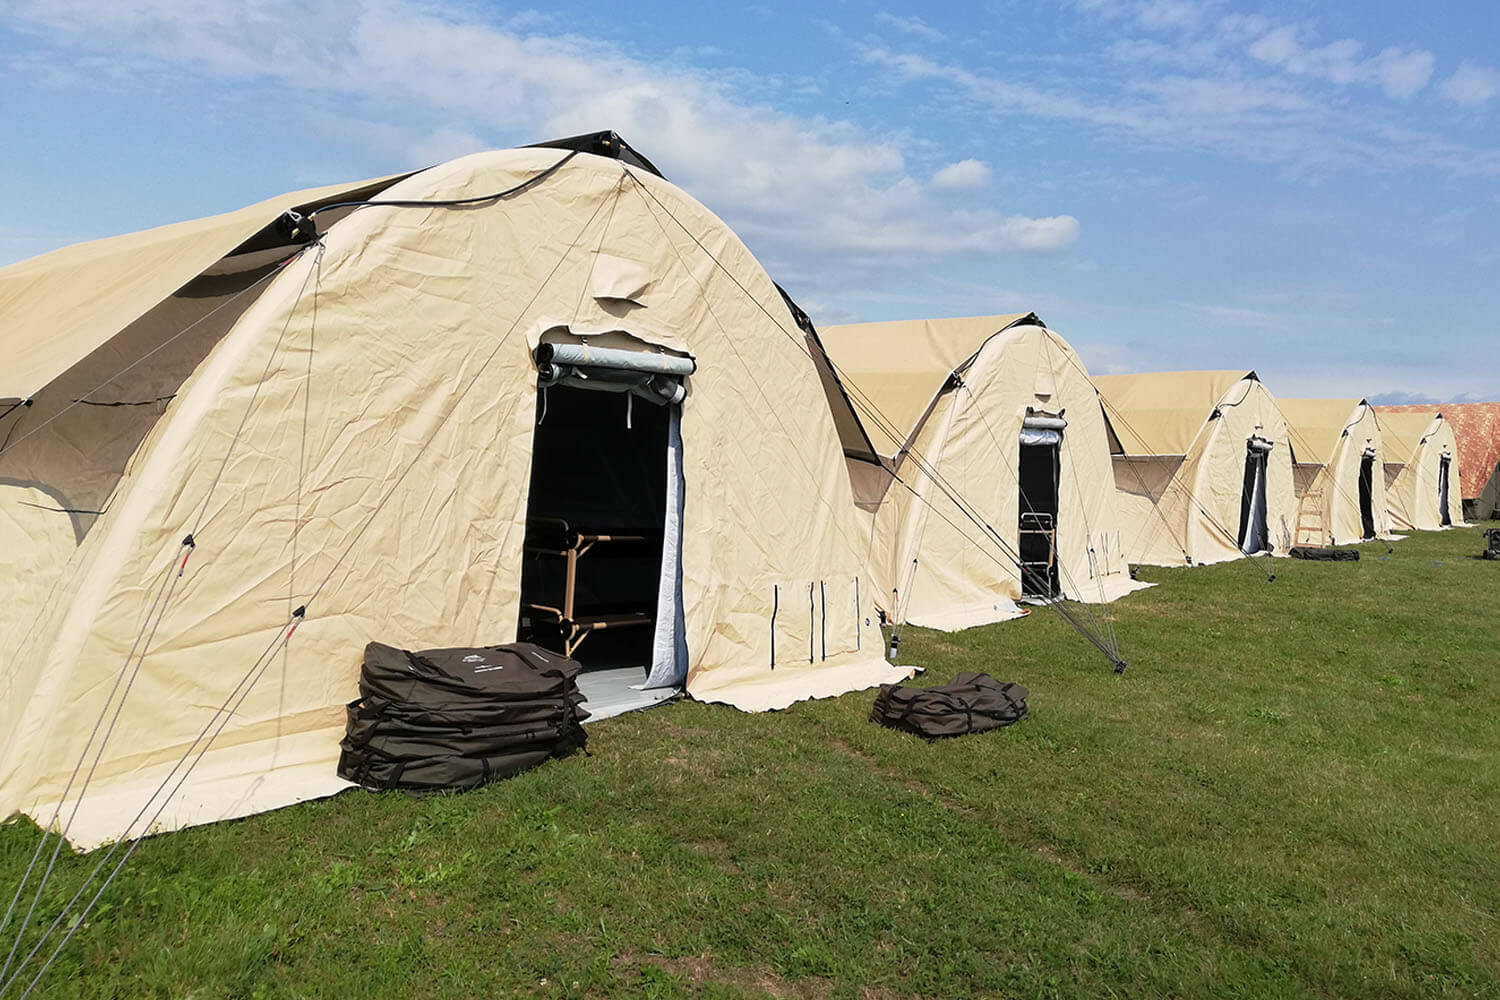 Multiple rapid deploy Nixus PRO inflatable military tents in a row